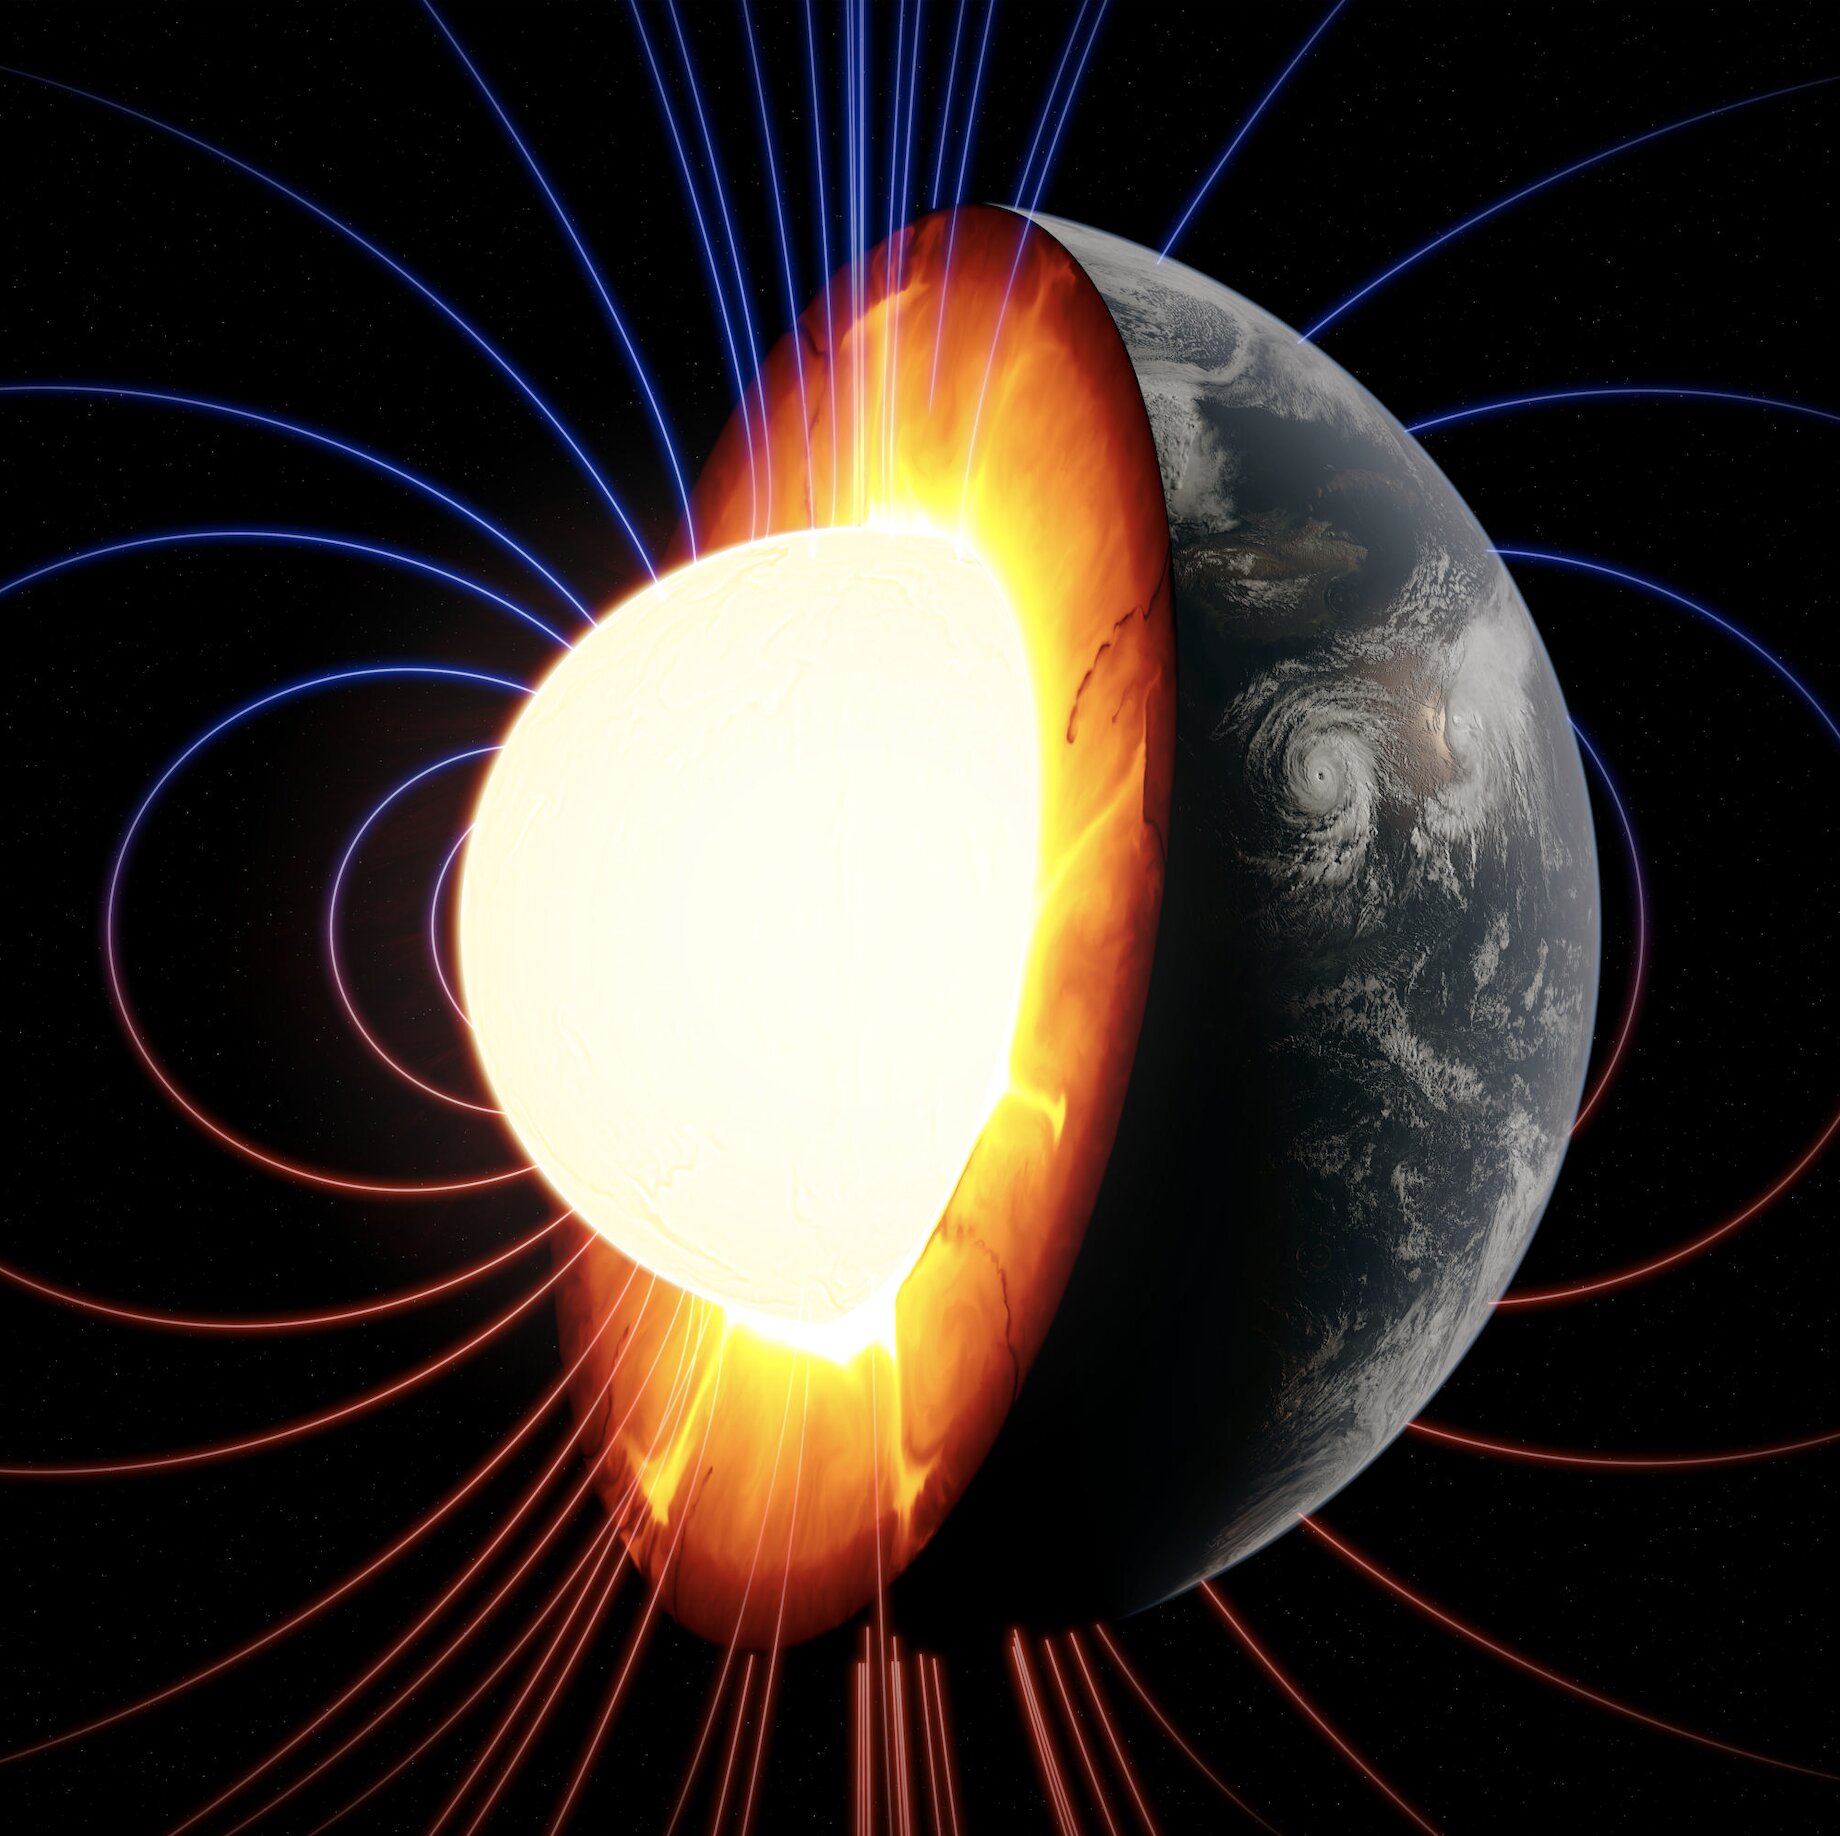 Study offers new, sharper evidence for early plate tectonics and geomagnetic pole shift